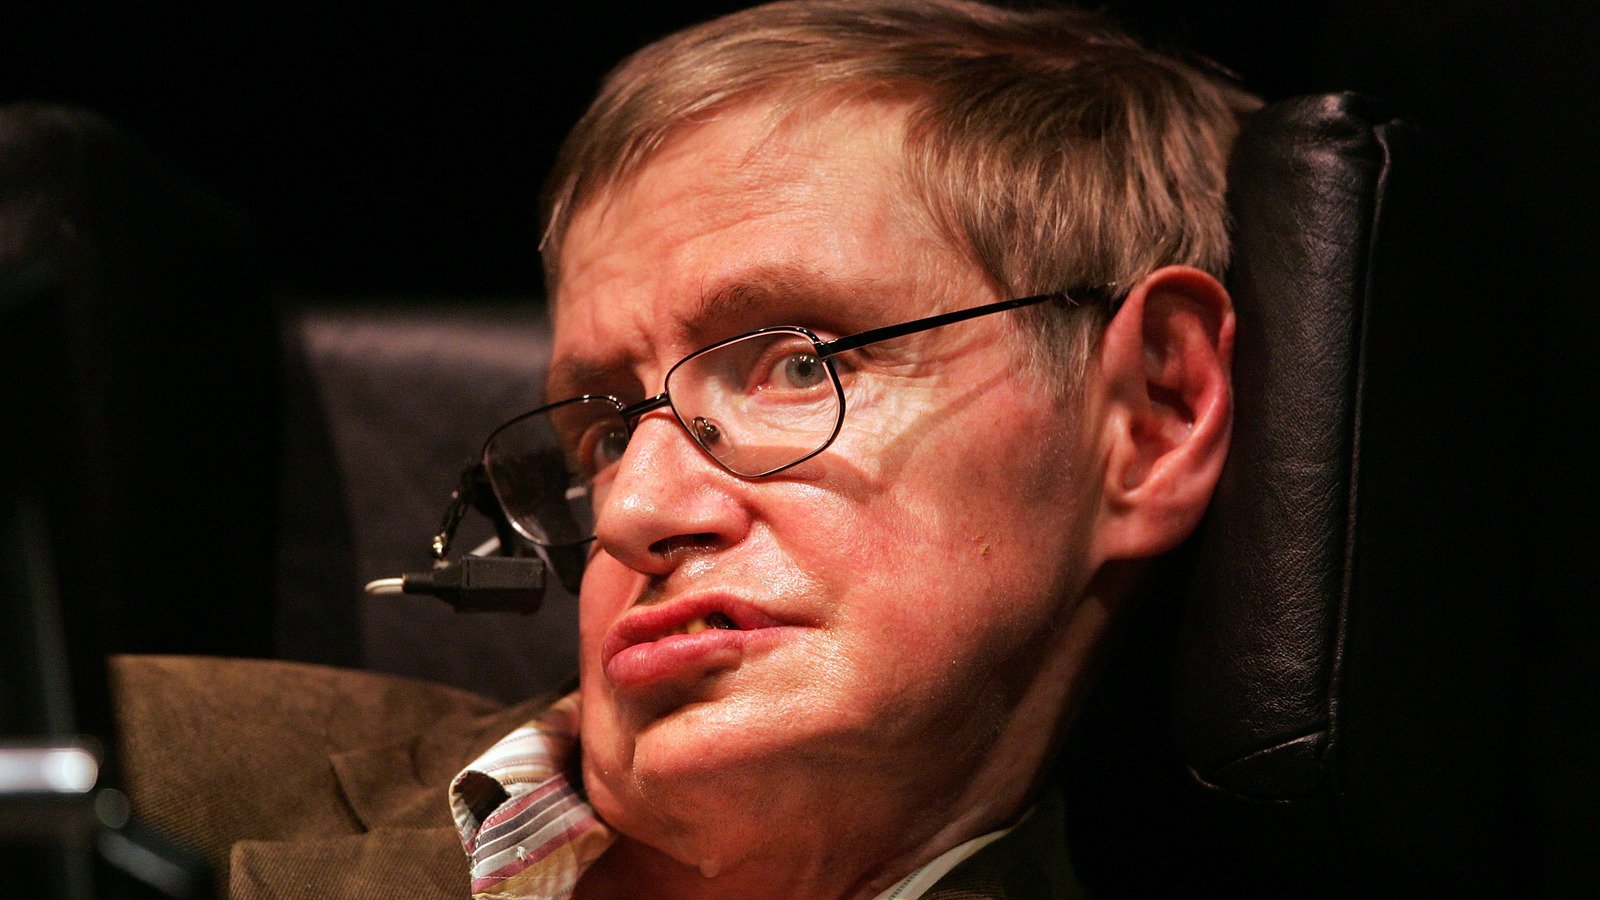 The Scientific Progress That Stephen Hawking Never Stopped Warning Us About